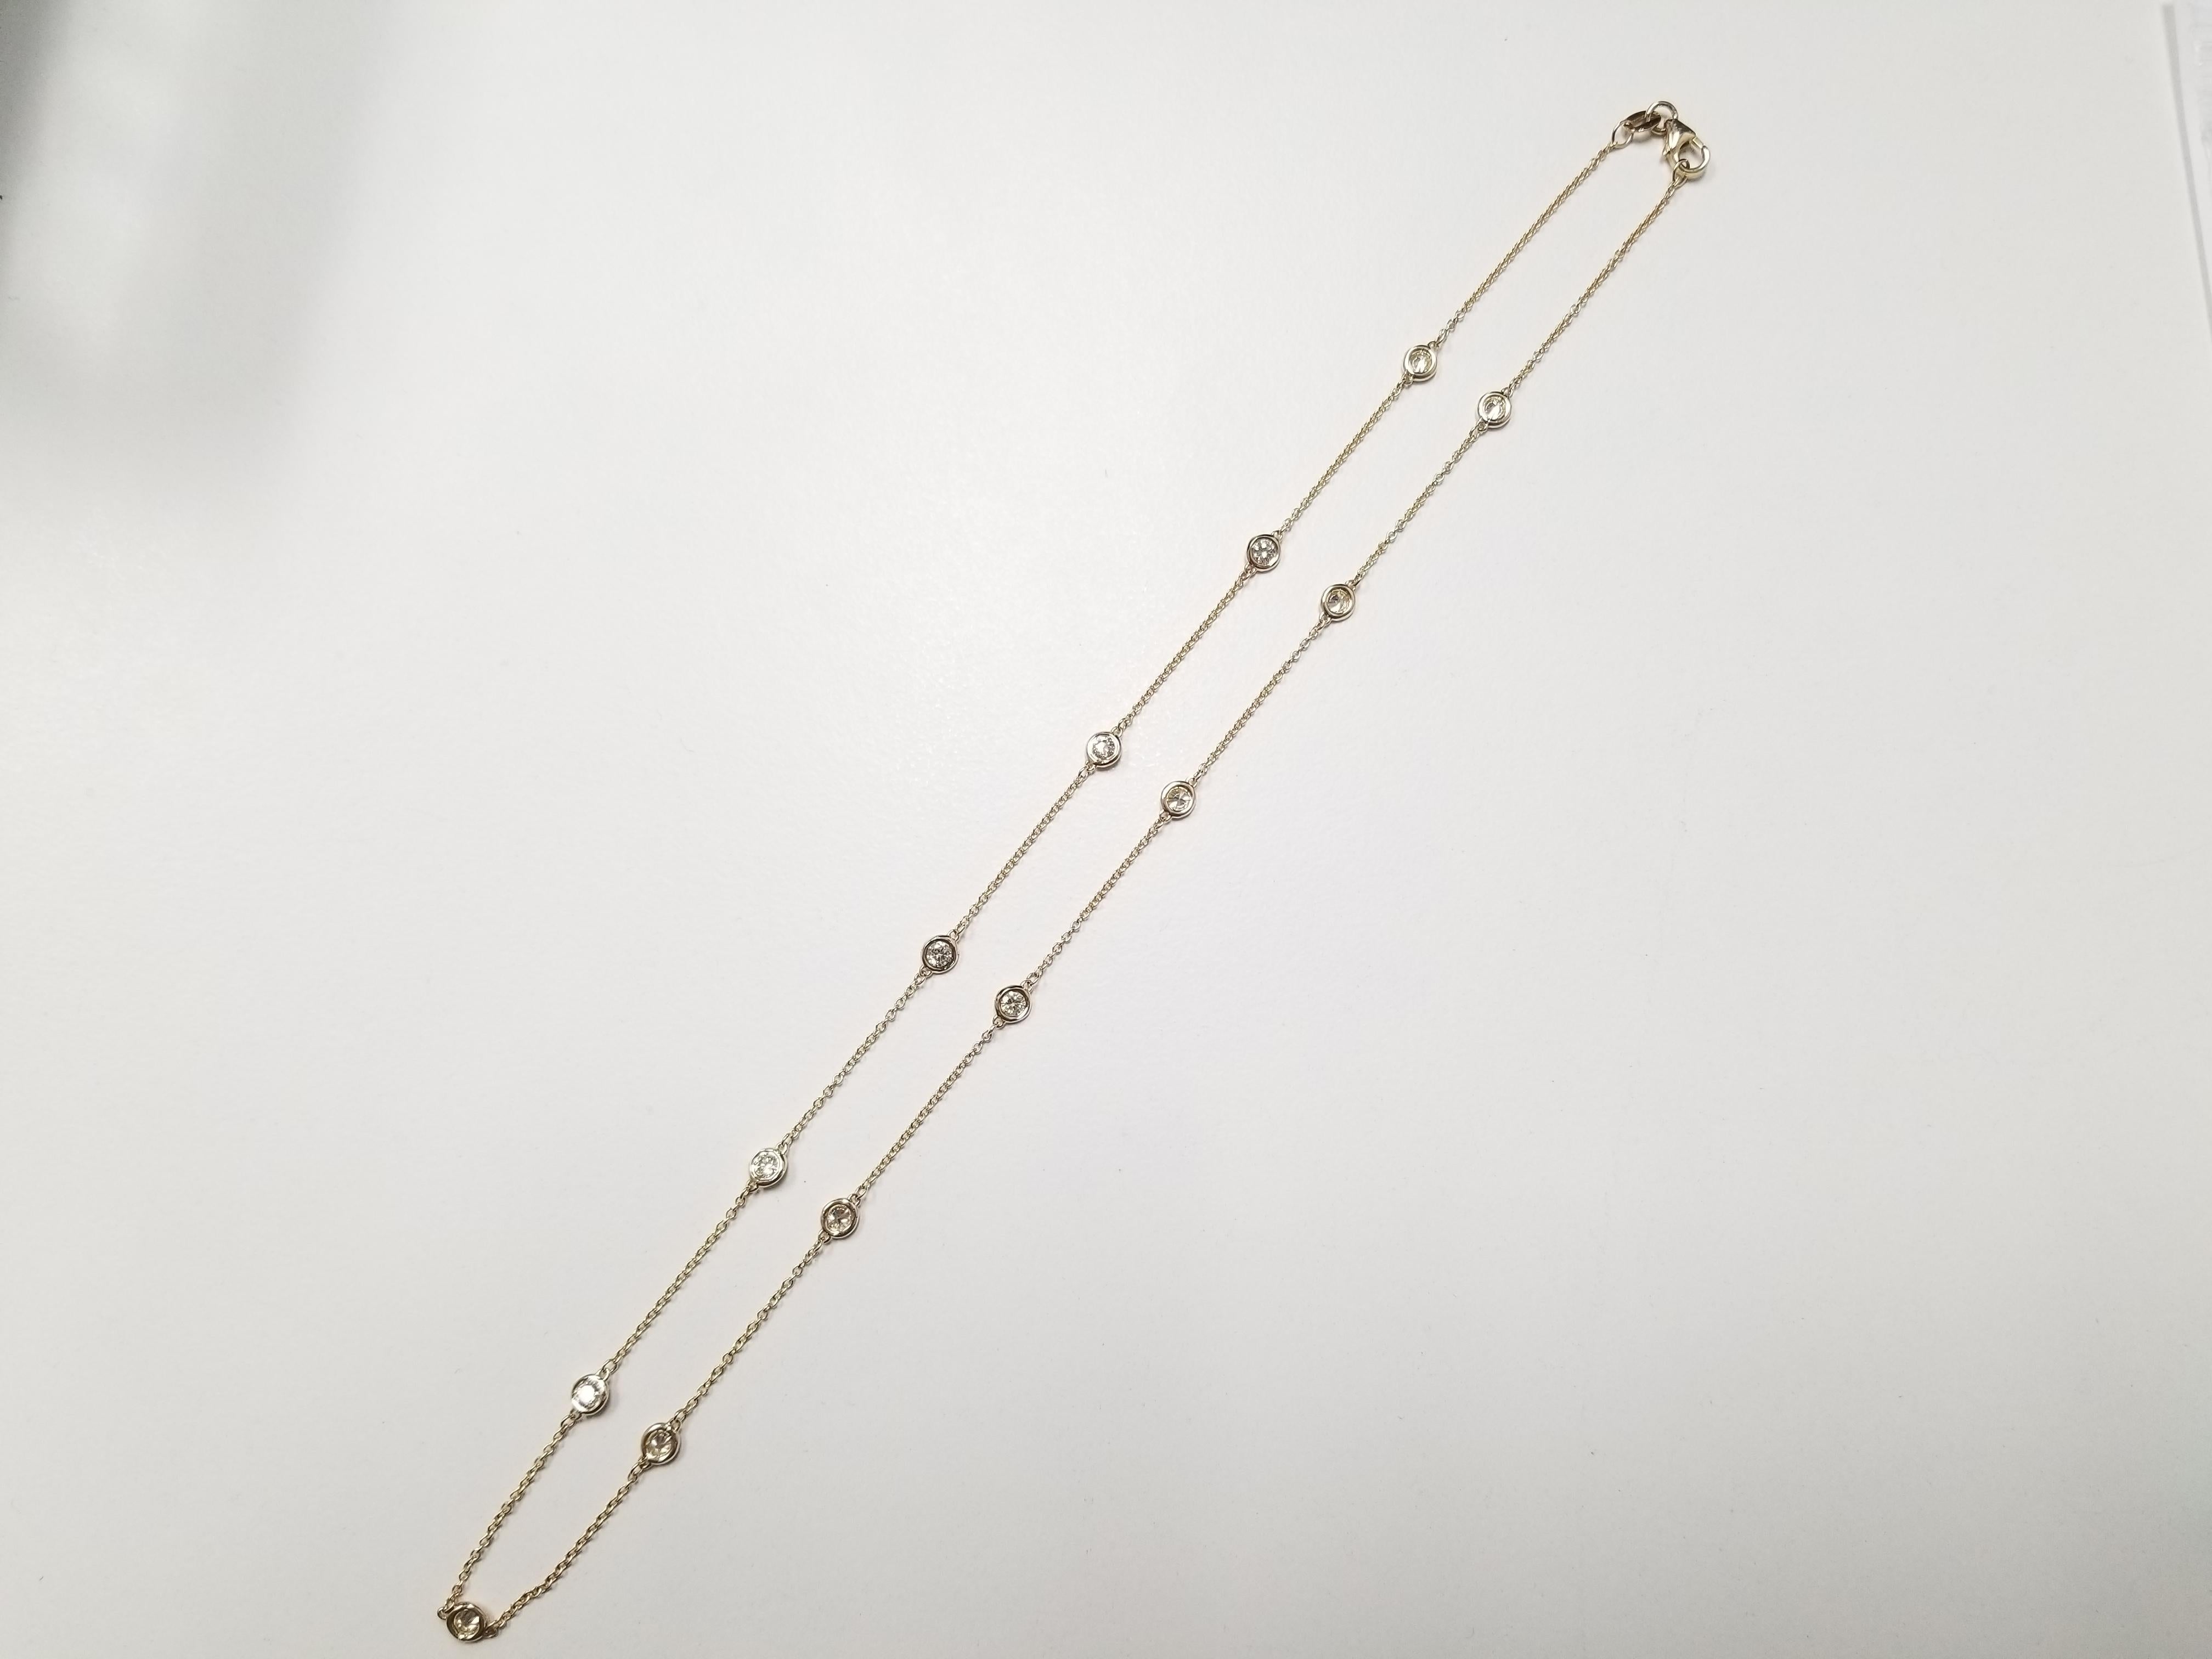 13 Station Diamond by the yard necklace set in Italian made 14K yellow gold. The total weight is 1.31 carats. Beautiful shiny stones. The total length is 18 inch.